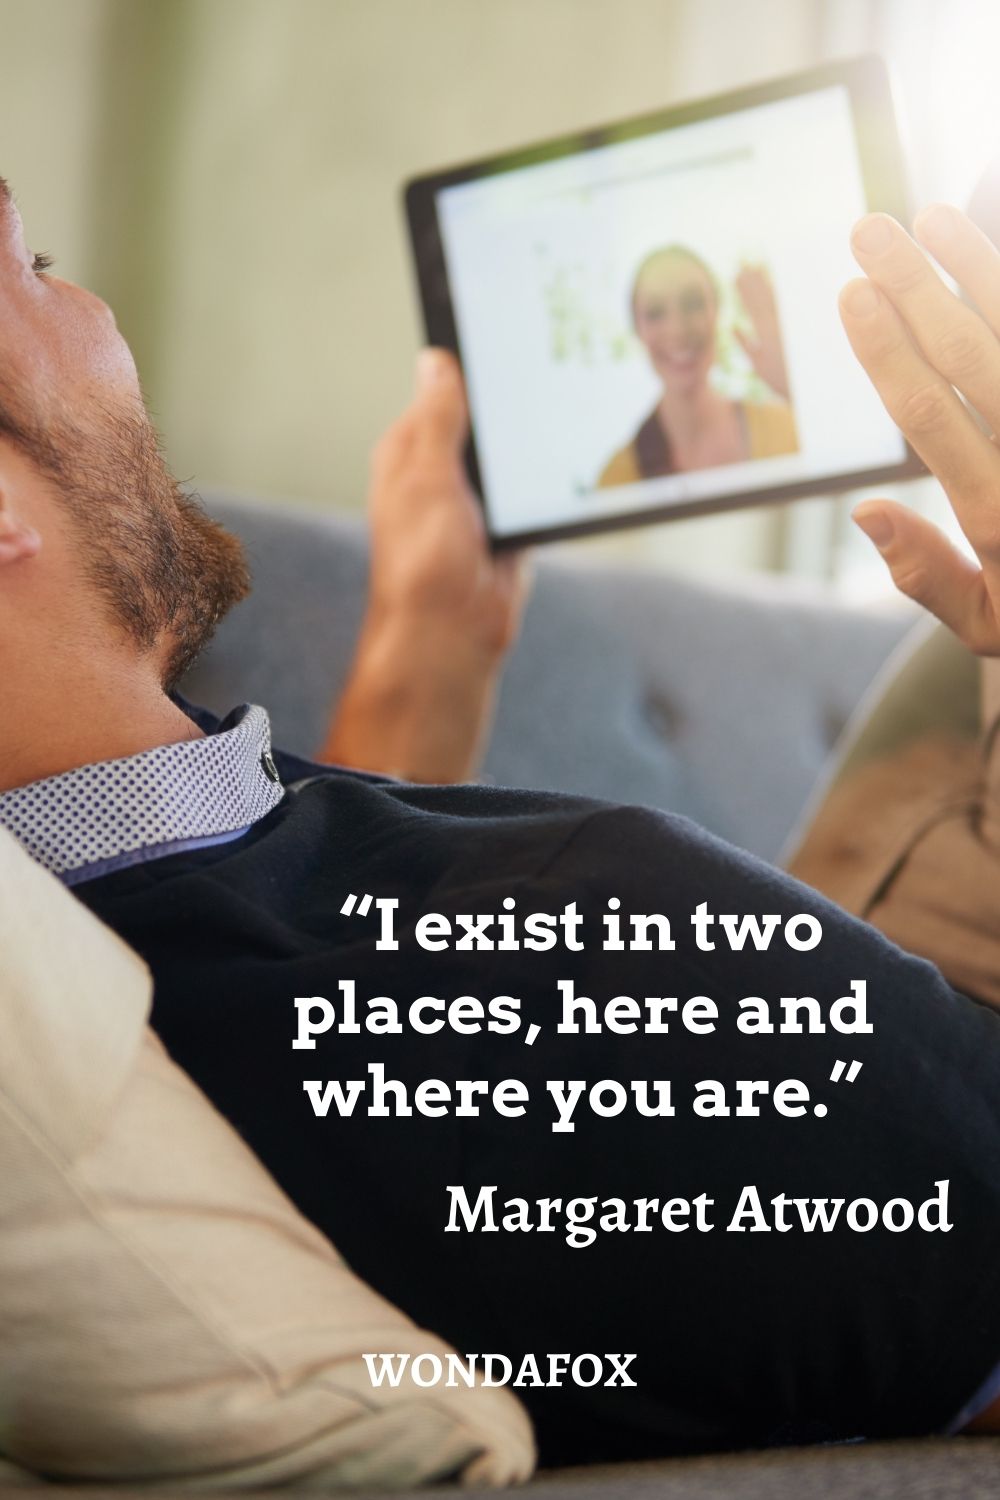 “I exist in two places, here and where you are.”
Margaret Atwood